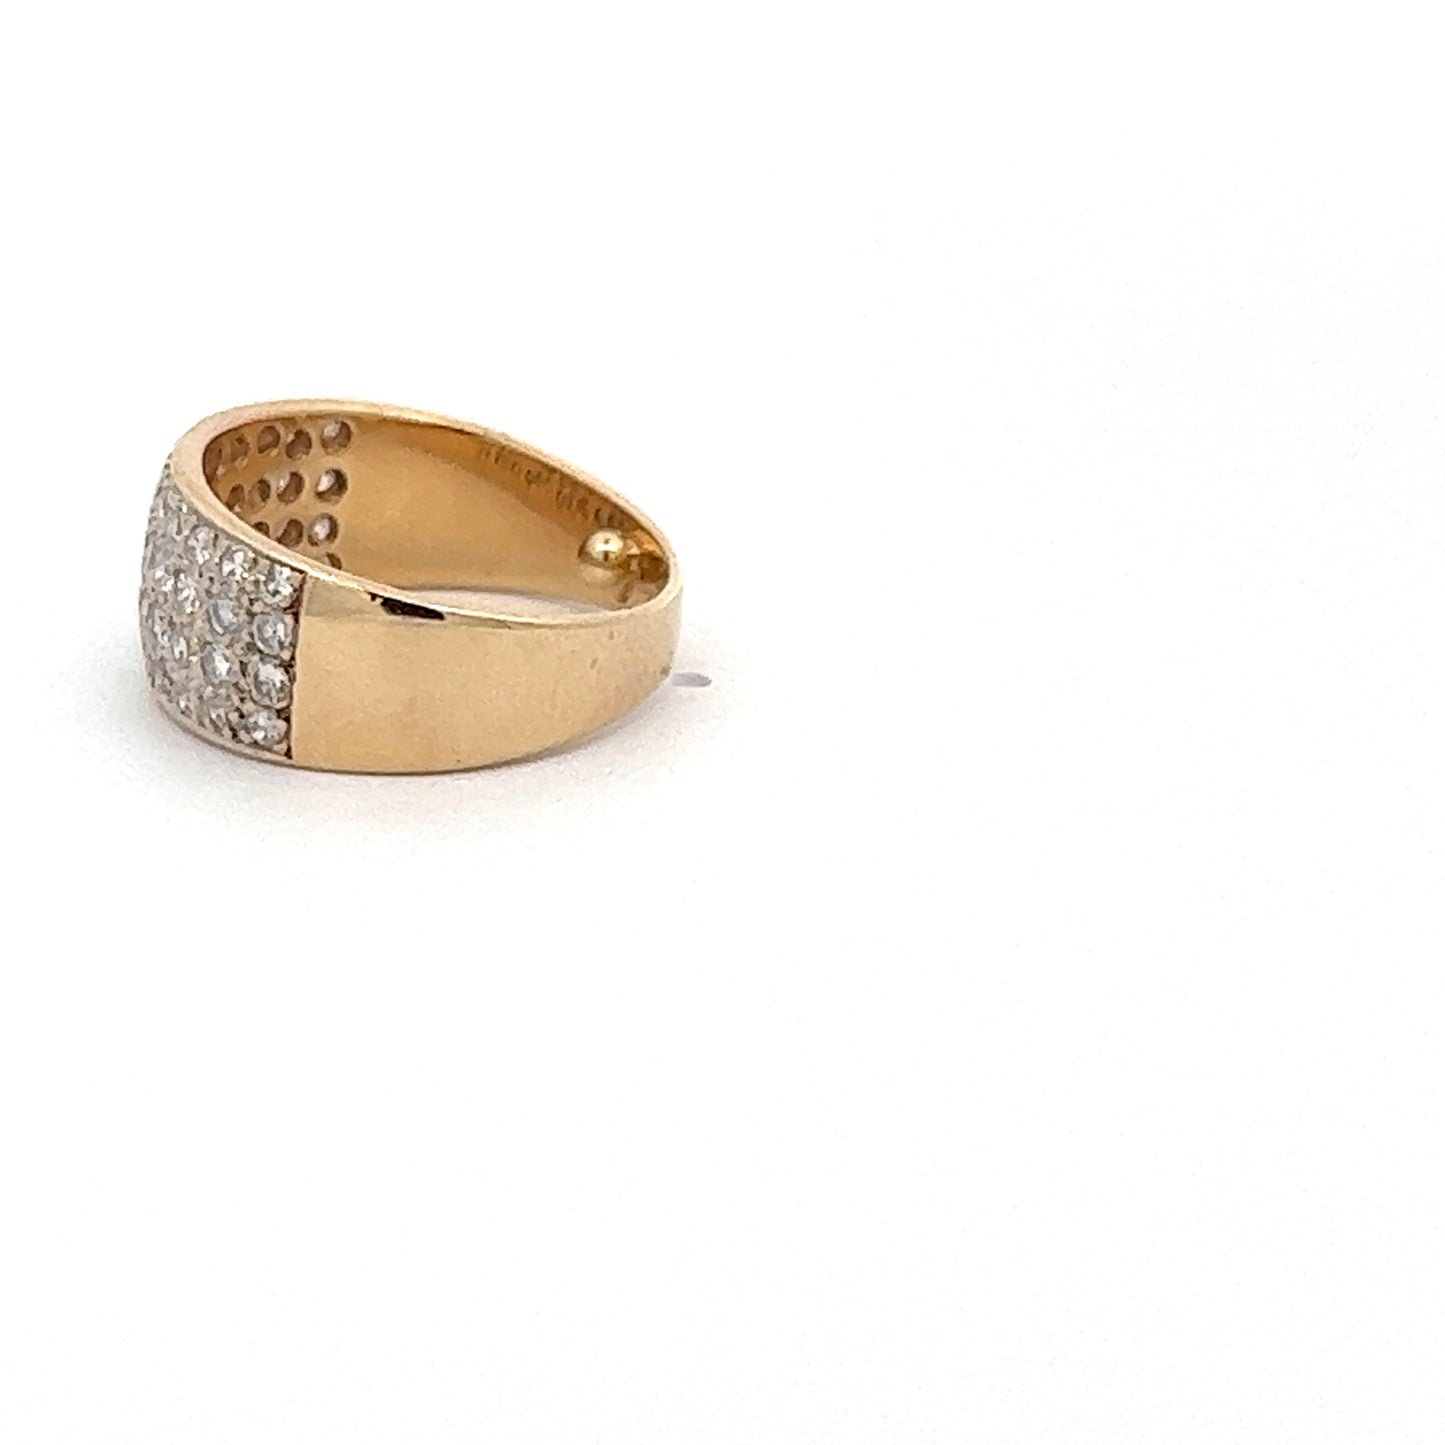 1980s 14KT Yellow Gold Diamond Ring side view